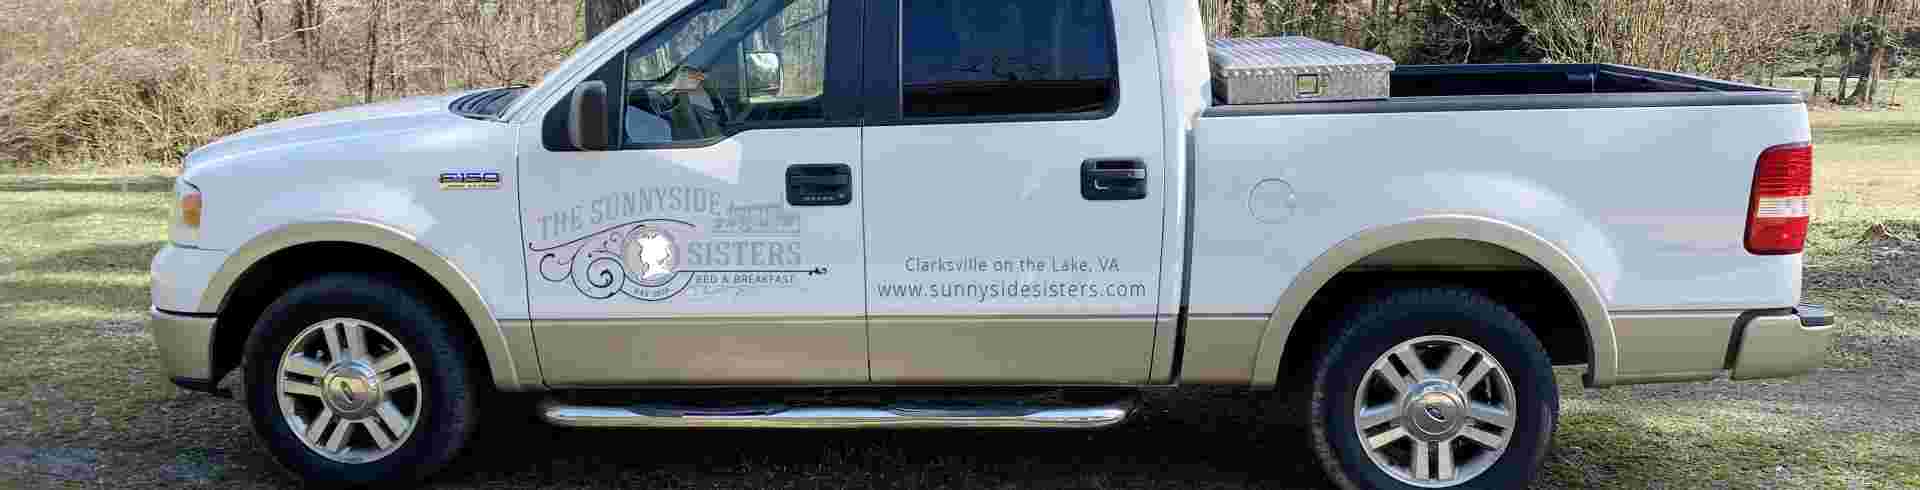 The Sunnyside Sisters Bed and Breakfast / Clarksville VA / Truck F-150 with logo